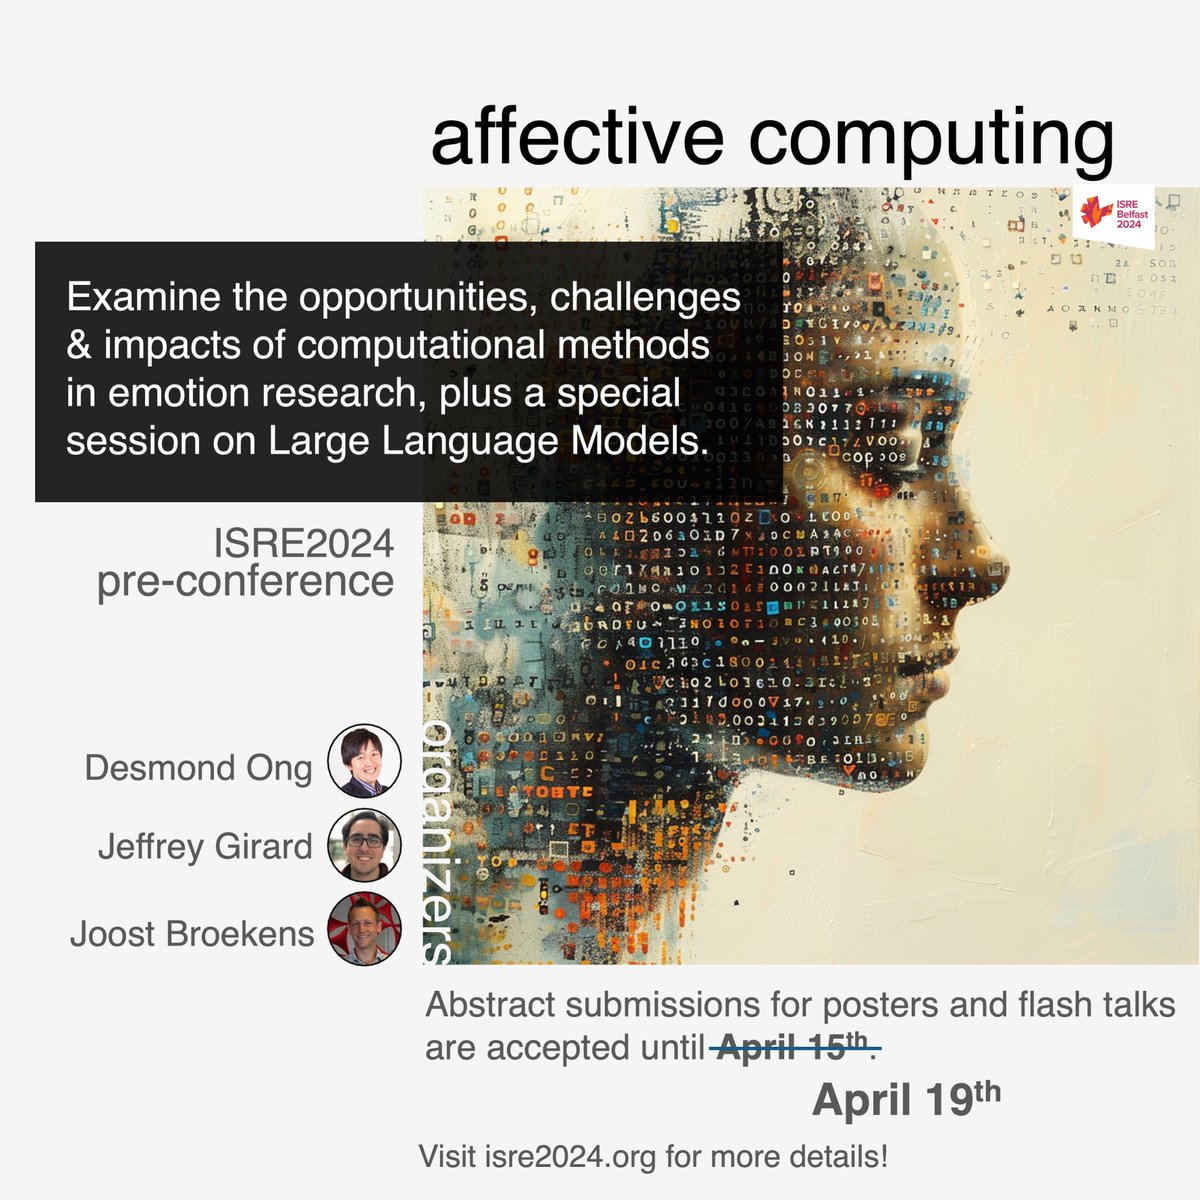 Great news for those who have missed the deadline to submit their abstract for the #ISRE2024 pre-conference in #AffectiveComputing! The deadline has now been extended to this Friday, April 19th! Submit now & kindly remind your colleagues. More details: sites.google.com/view/acisre2024